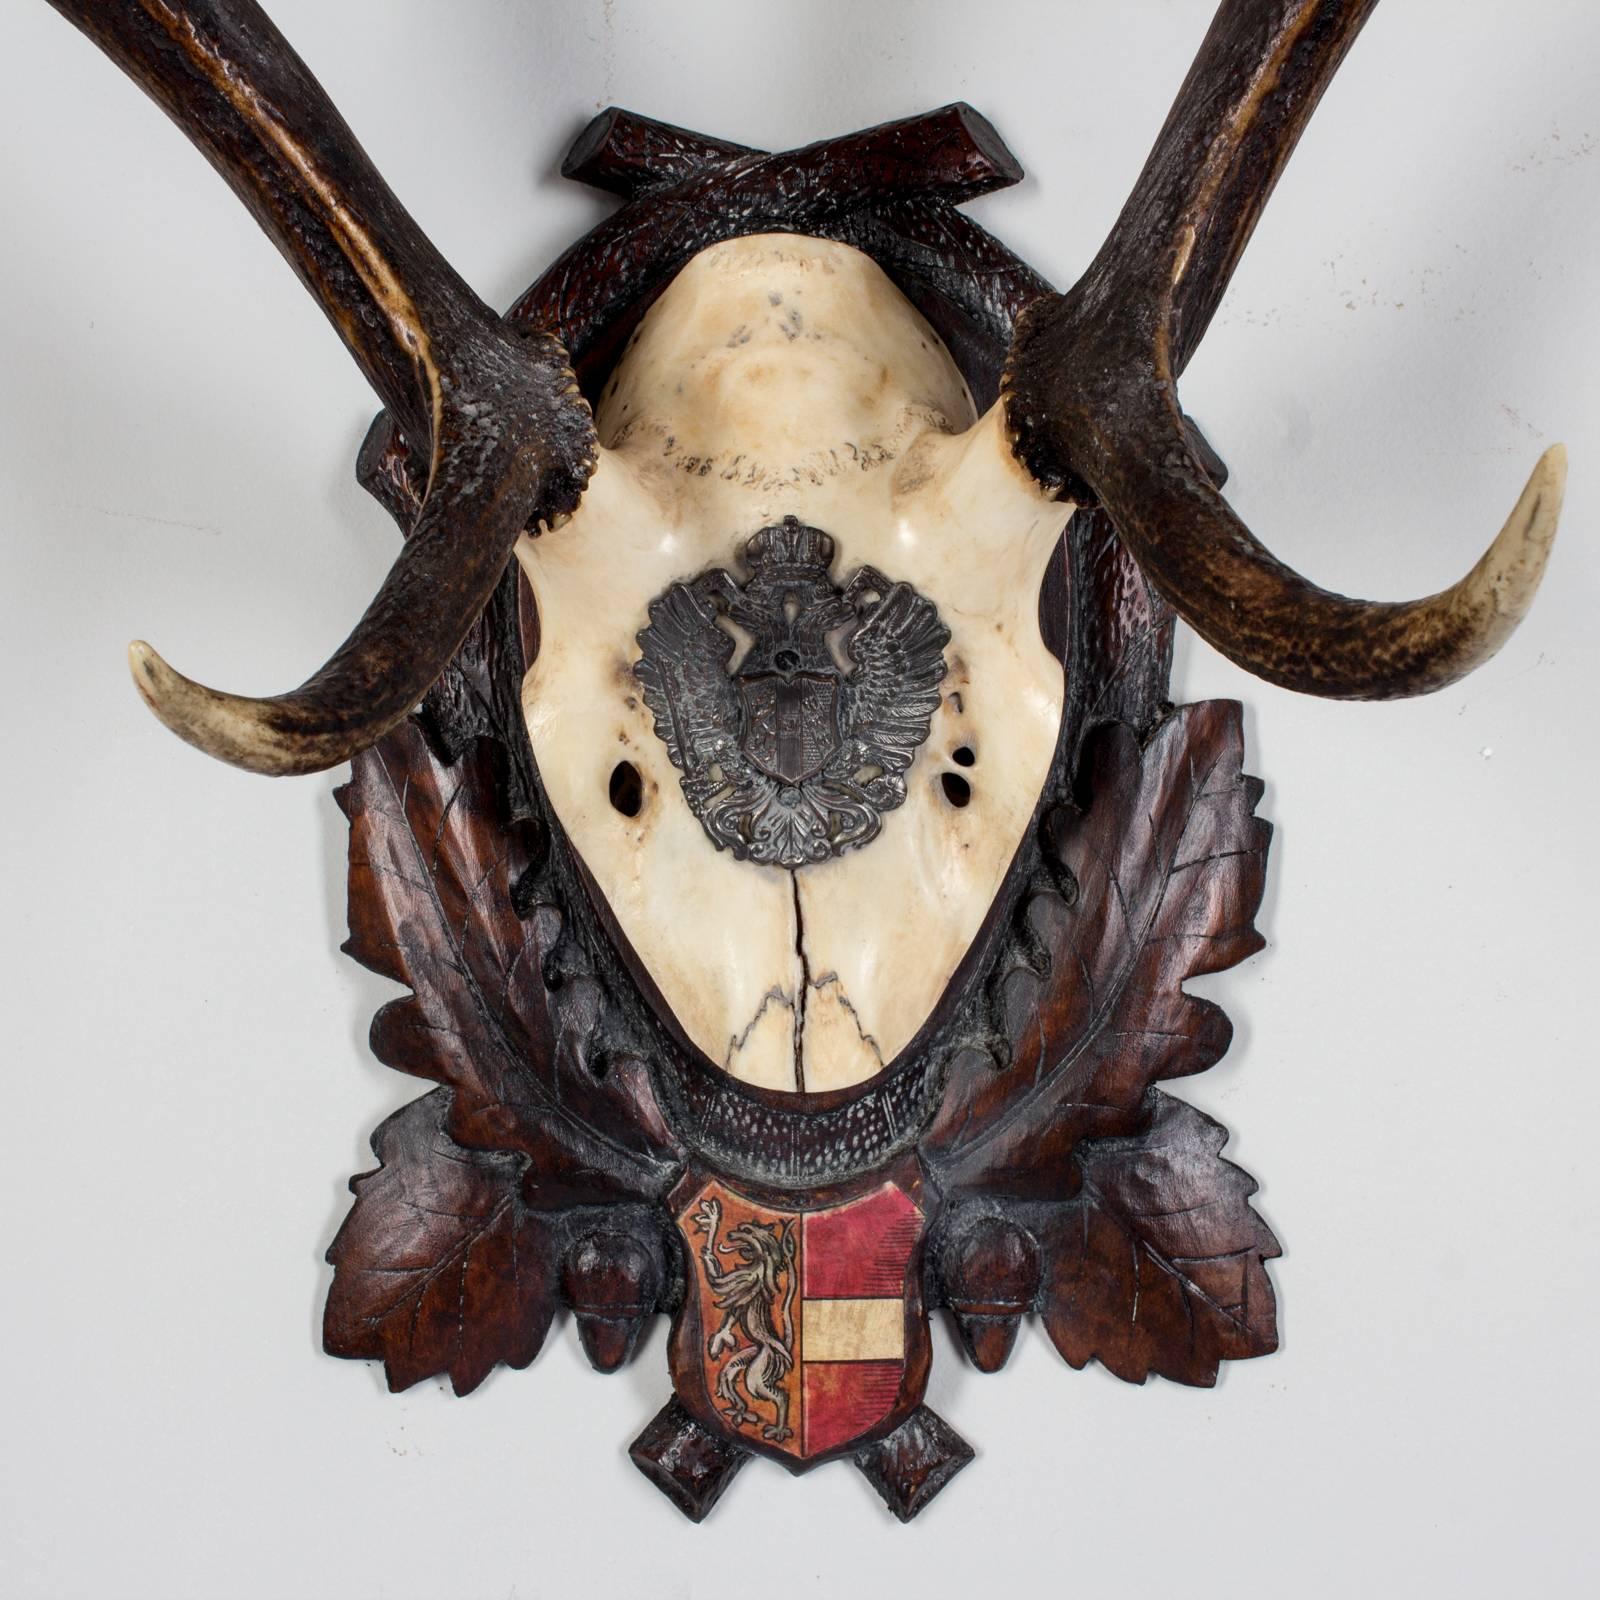 19th century Austrian red stag on original Black Forest carved plaque that hung in Emperor Franz Joseph's castle at Eckartsau in the Southern Austrian Alps. Eckartsau was a favorite hunting schloss of the Habsburg family. The plaque itself is